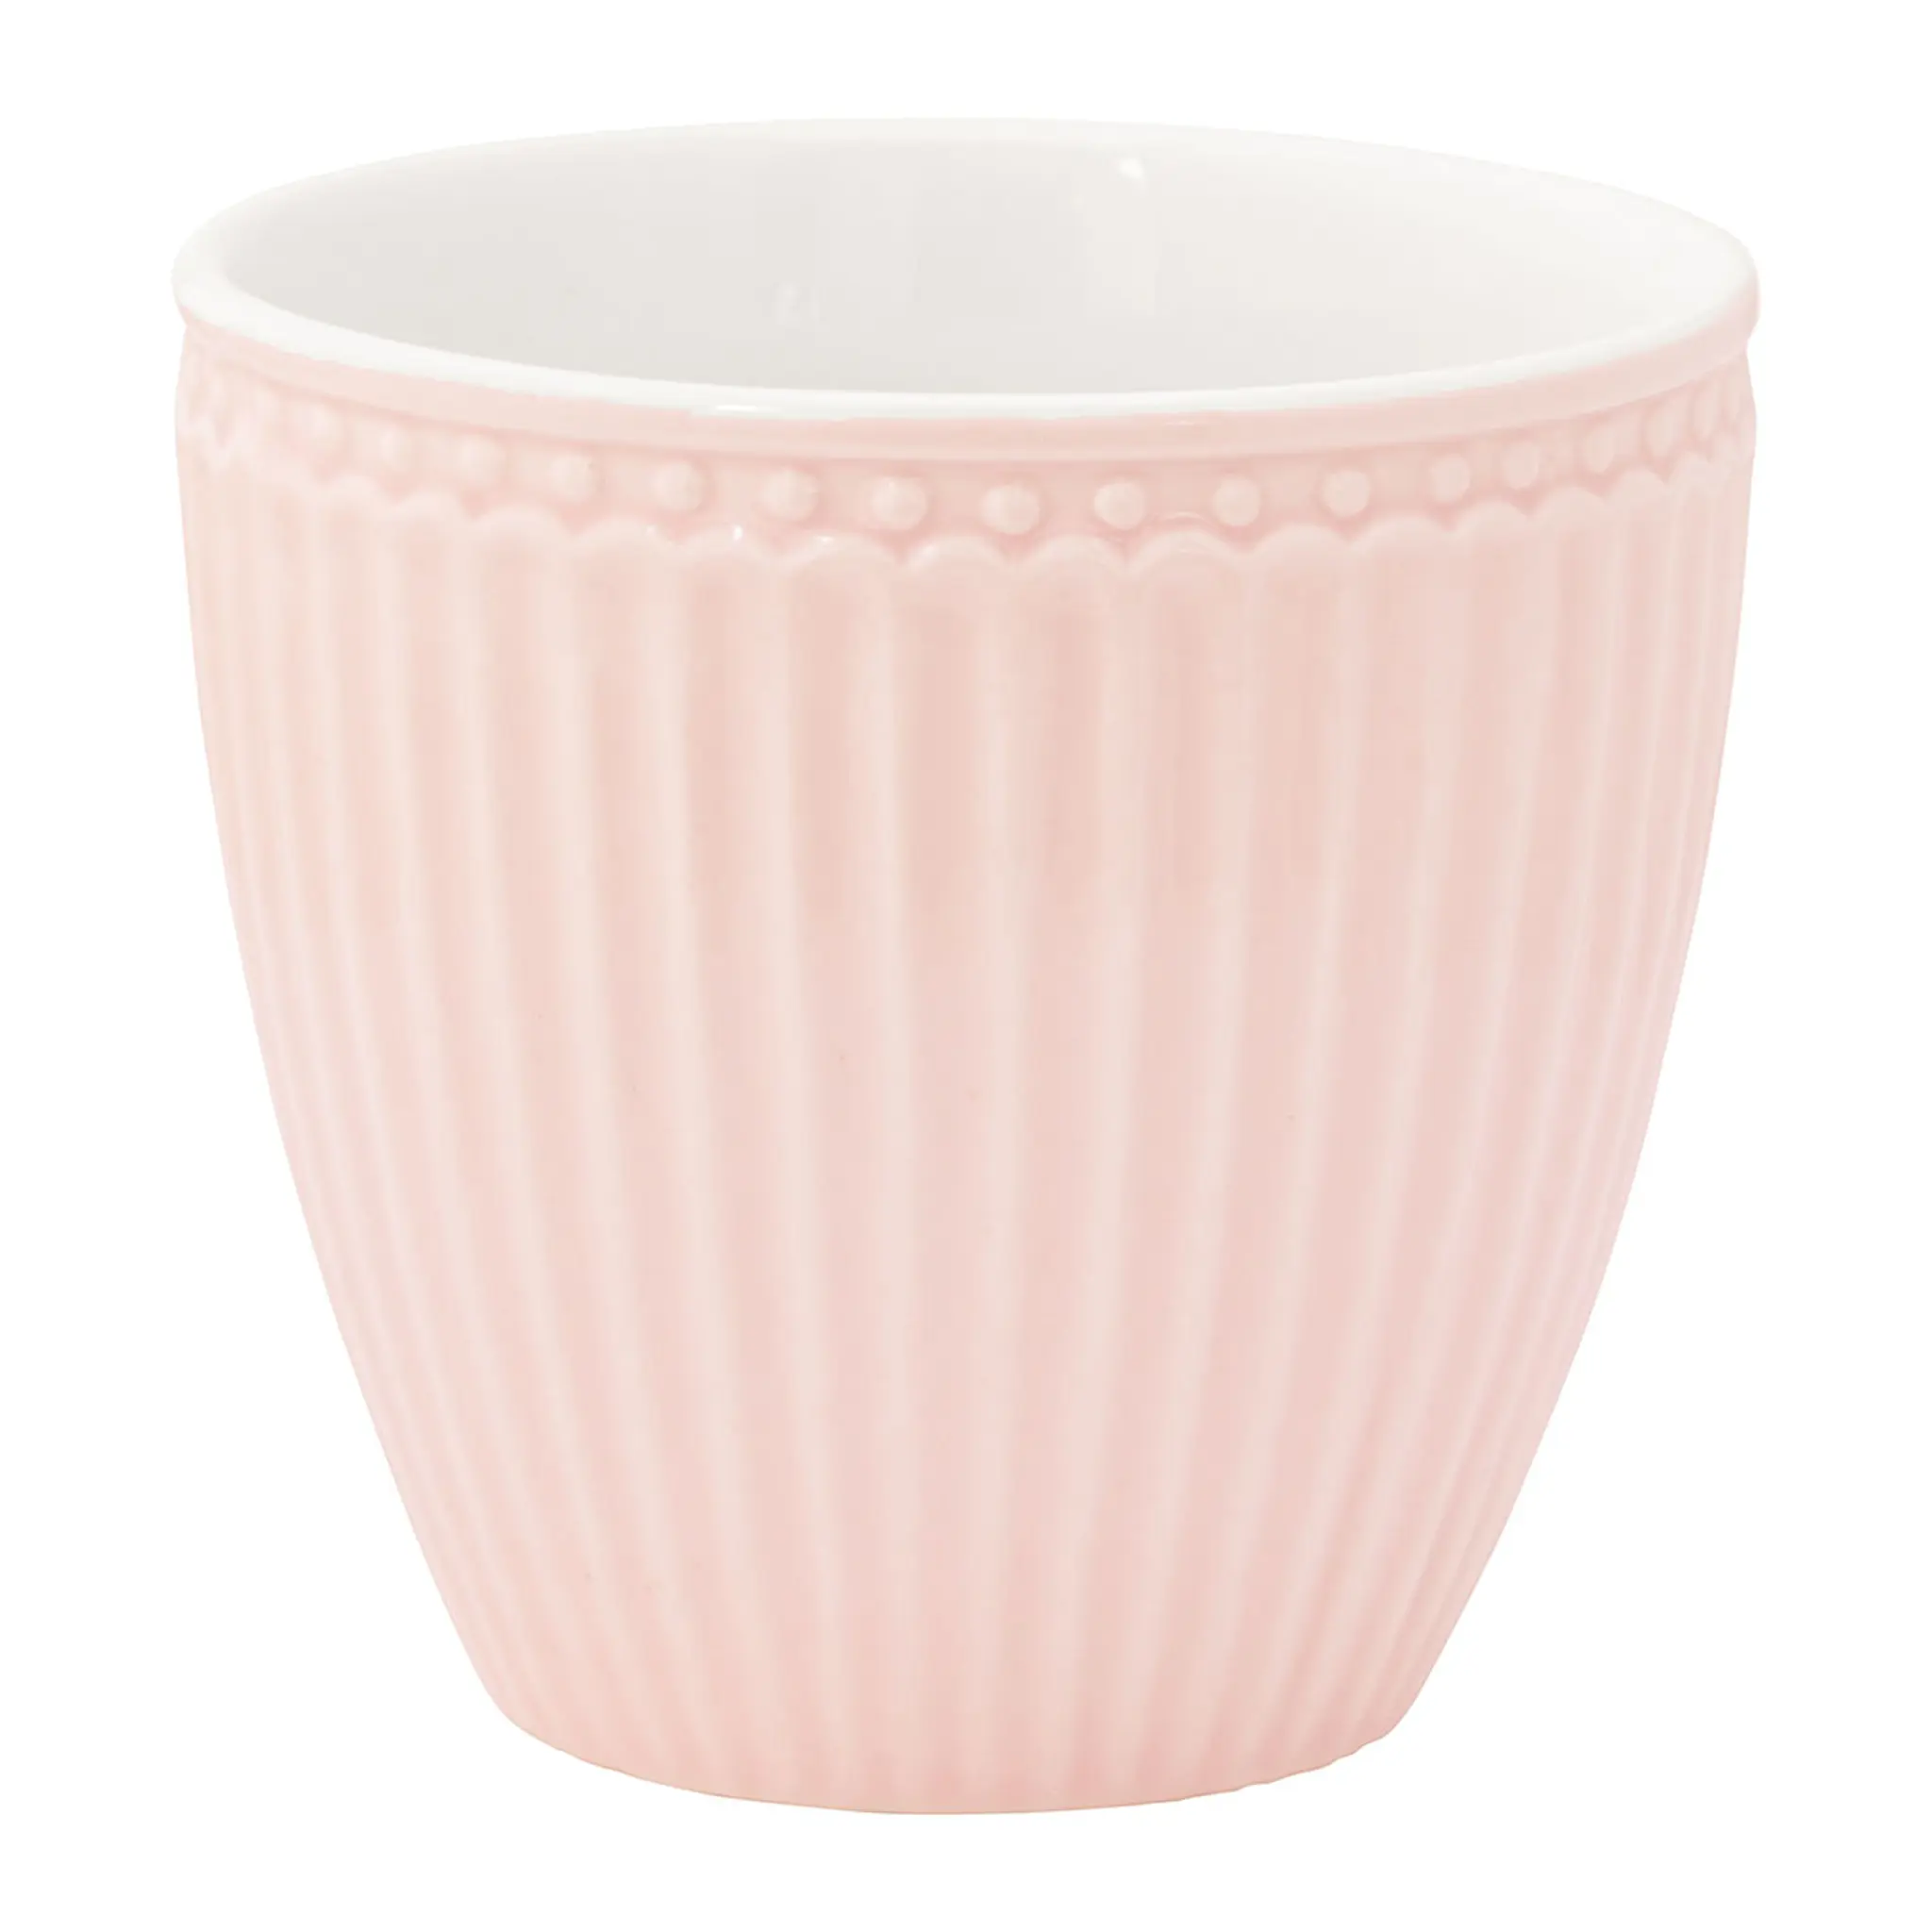 GreenGate Alice Lattemugg 35 cl Pale Pink